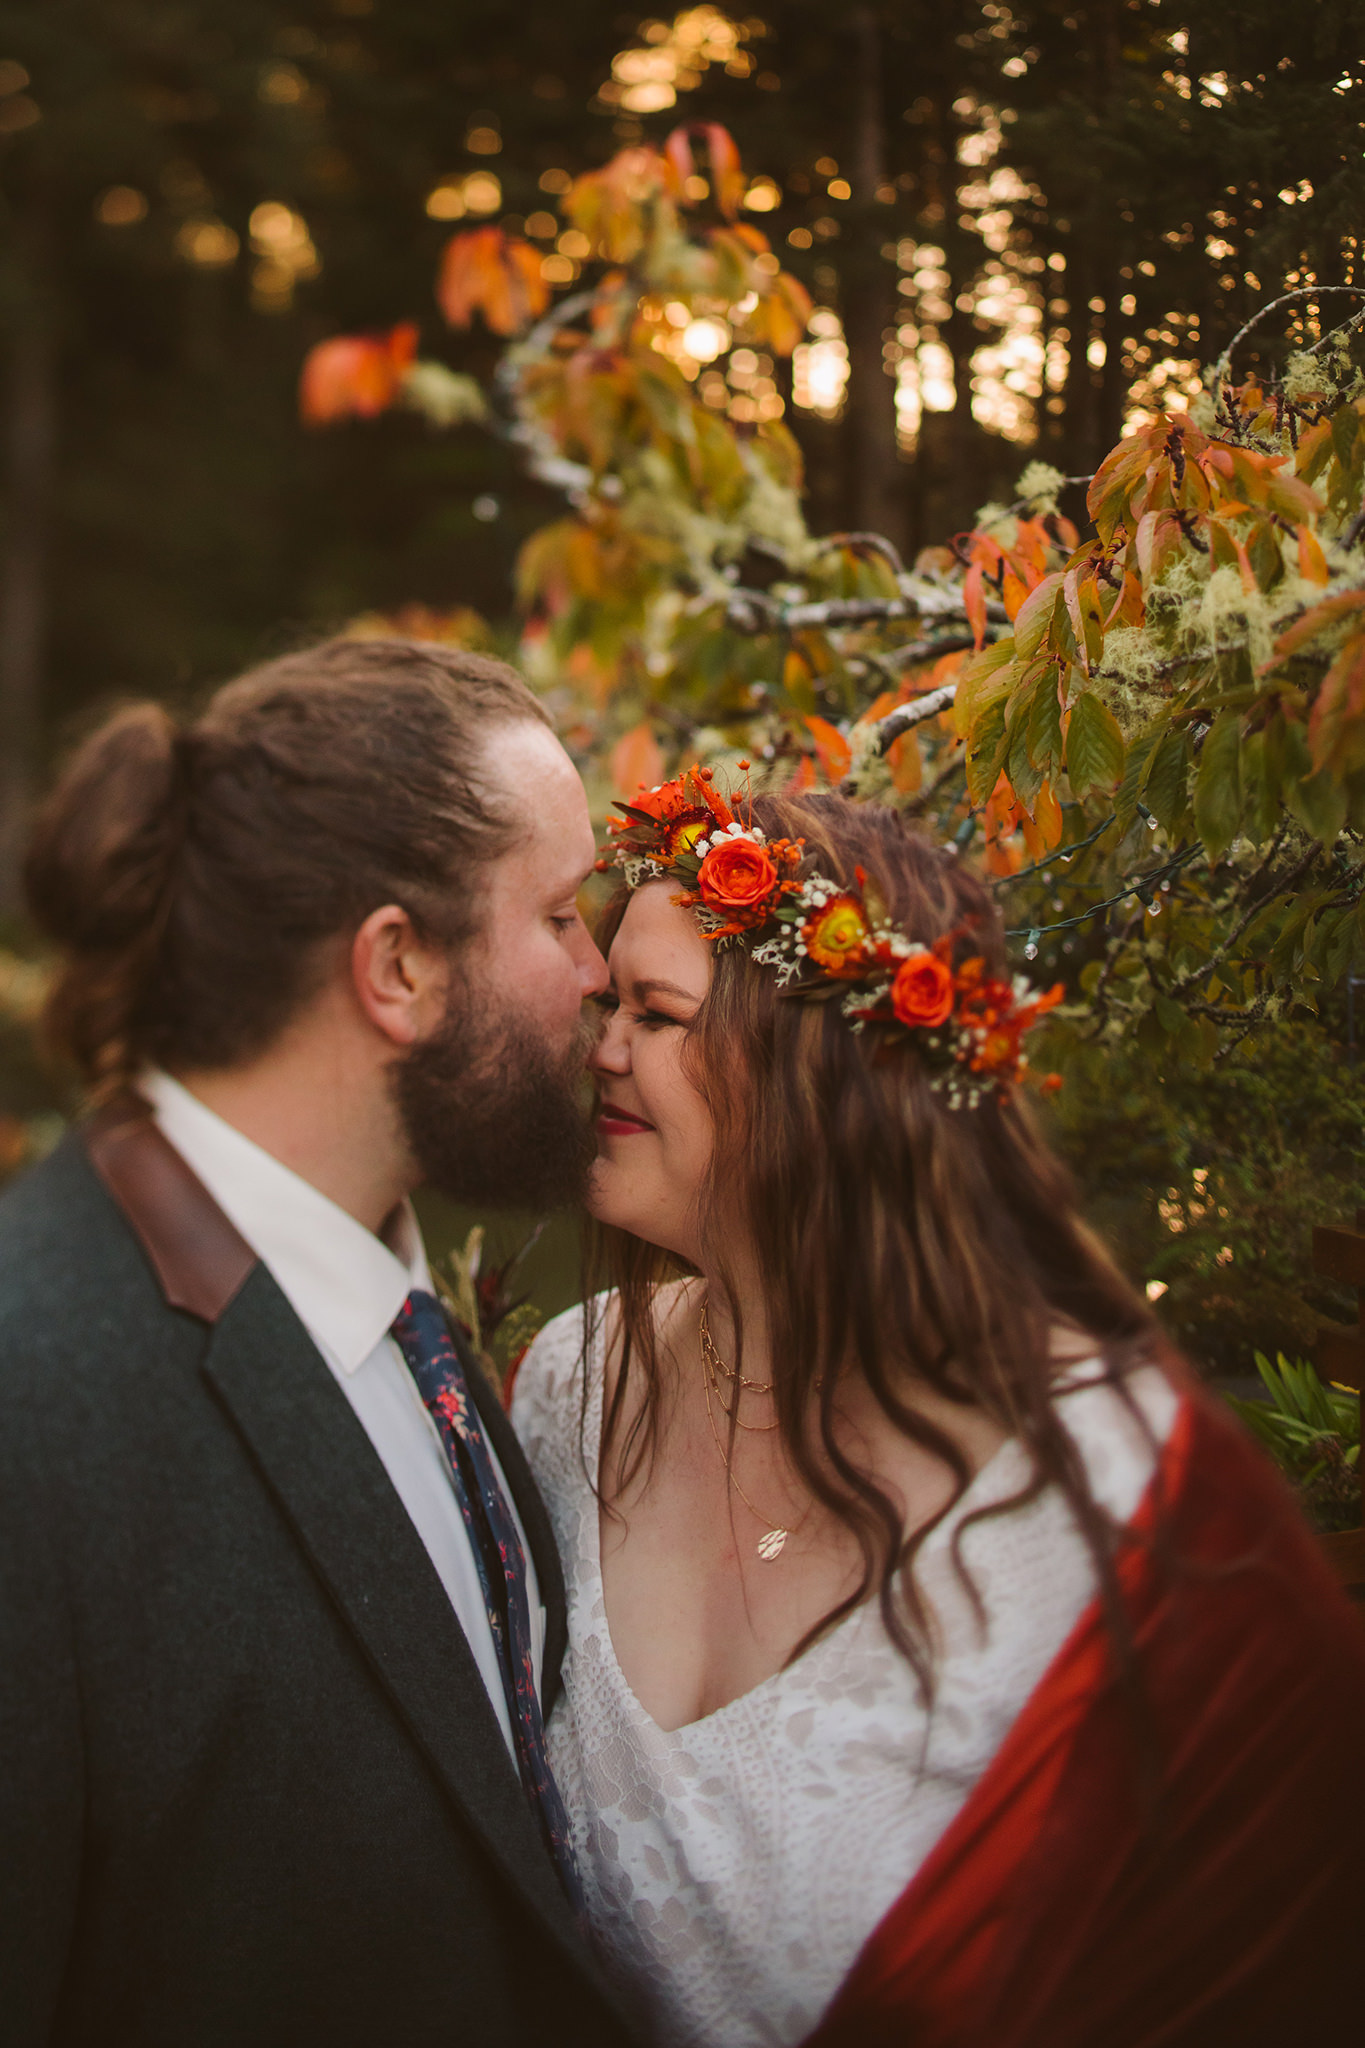 An elopement photo in the formal garden at Shore Acres State Park